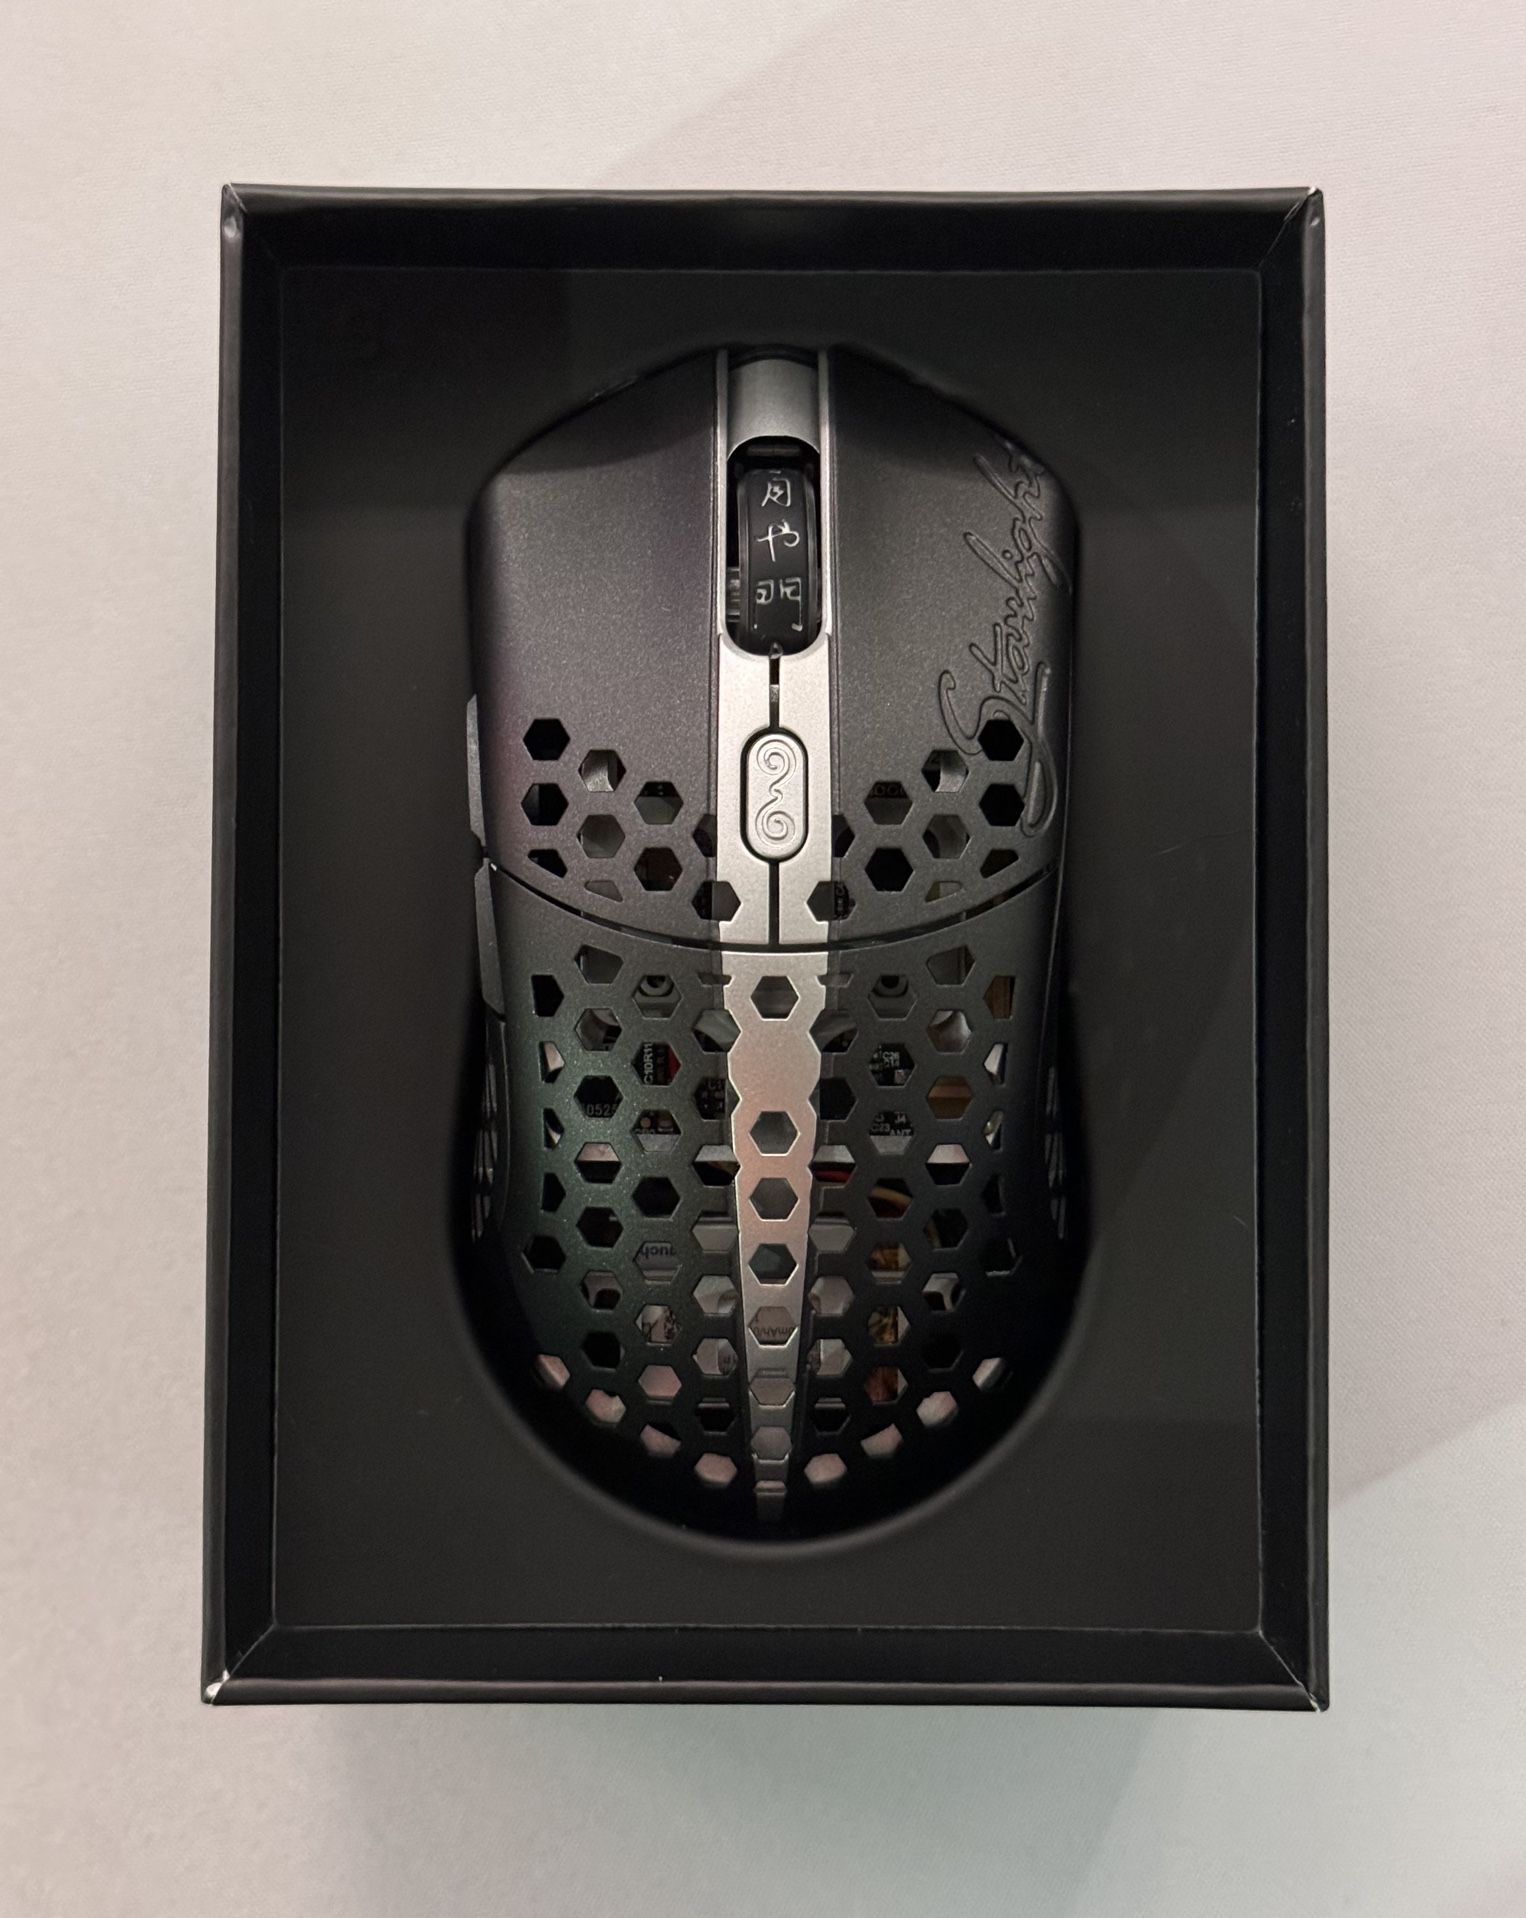 Finalmouse starlight-12 the last legend small